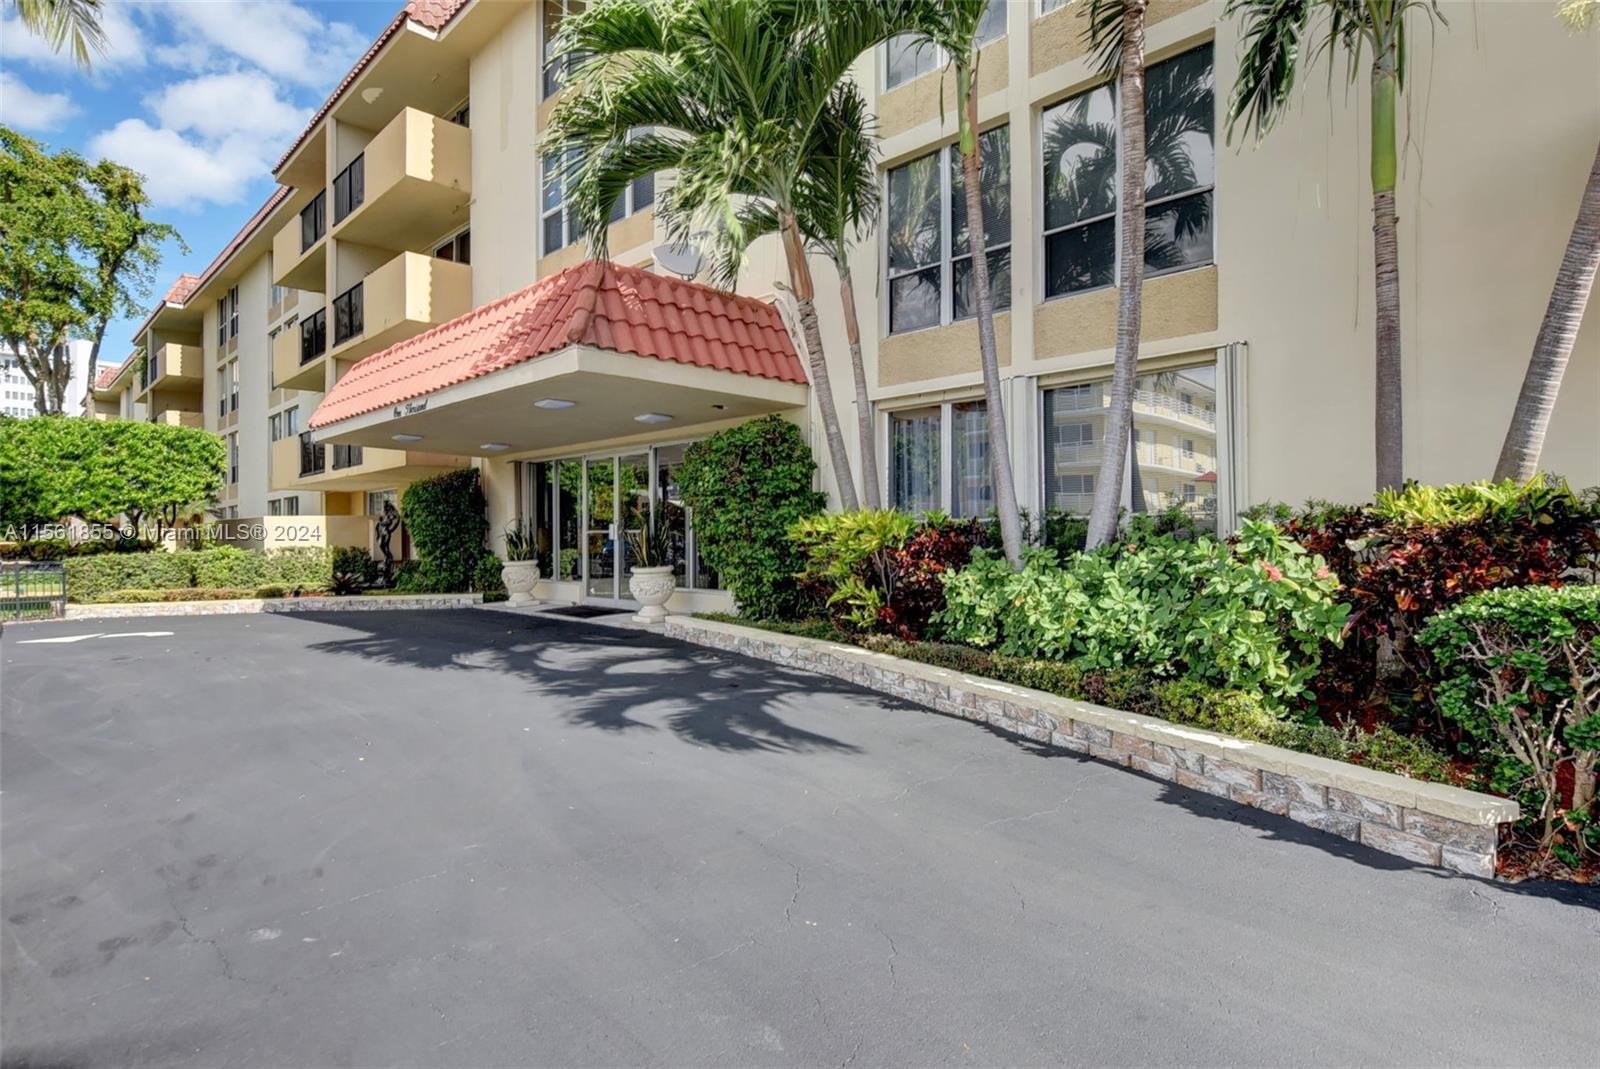 Prime location. Rarely available 2BD/2BA condo located in East Boca just 3 short blocks to the Beach